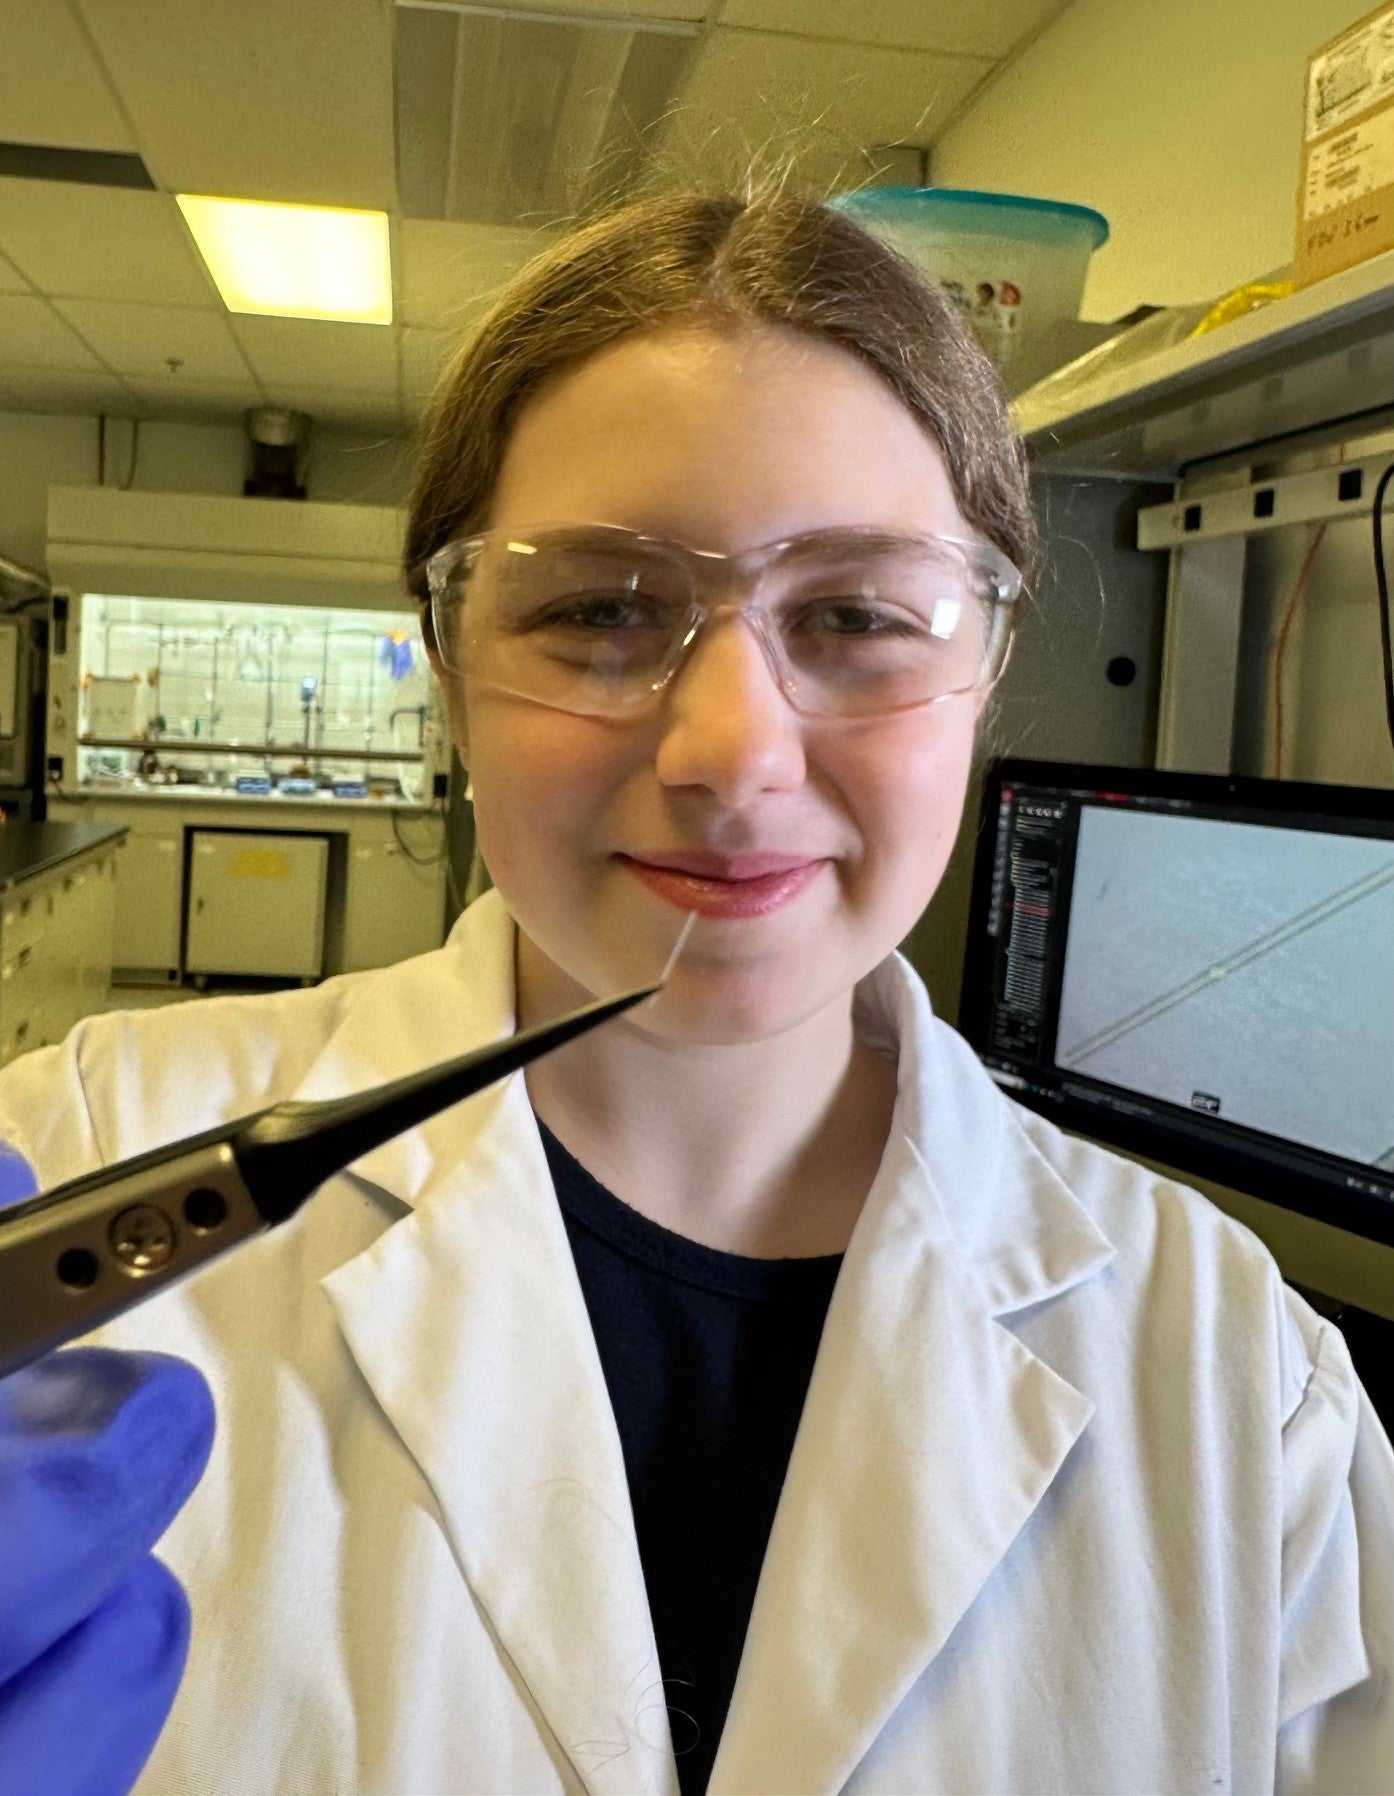 Female Waterloo co-op student smiling holding something while on work term at Ripple Therapeutics